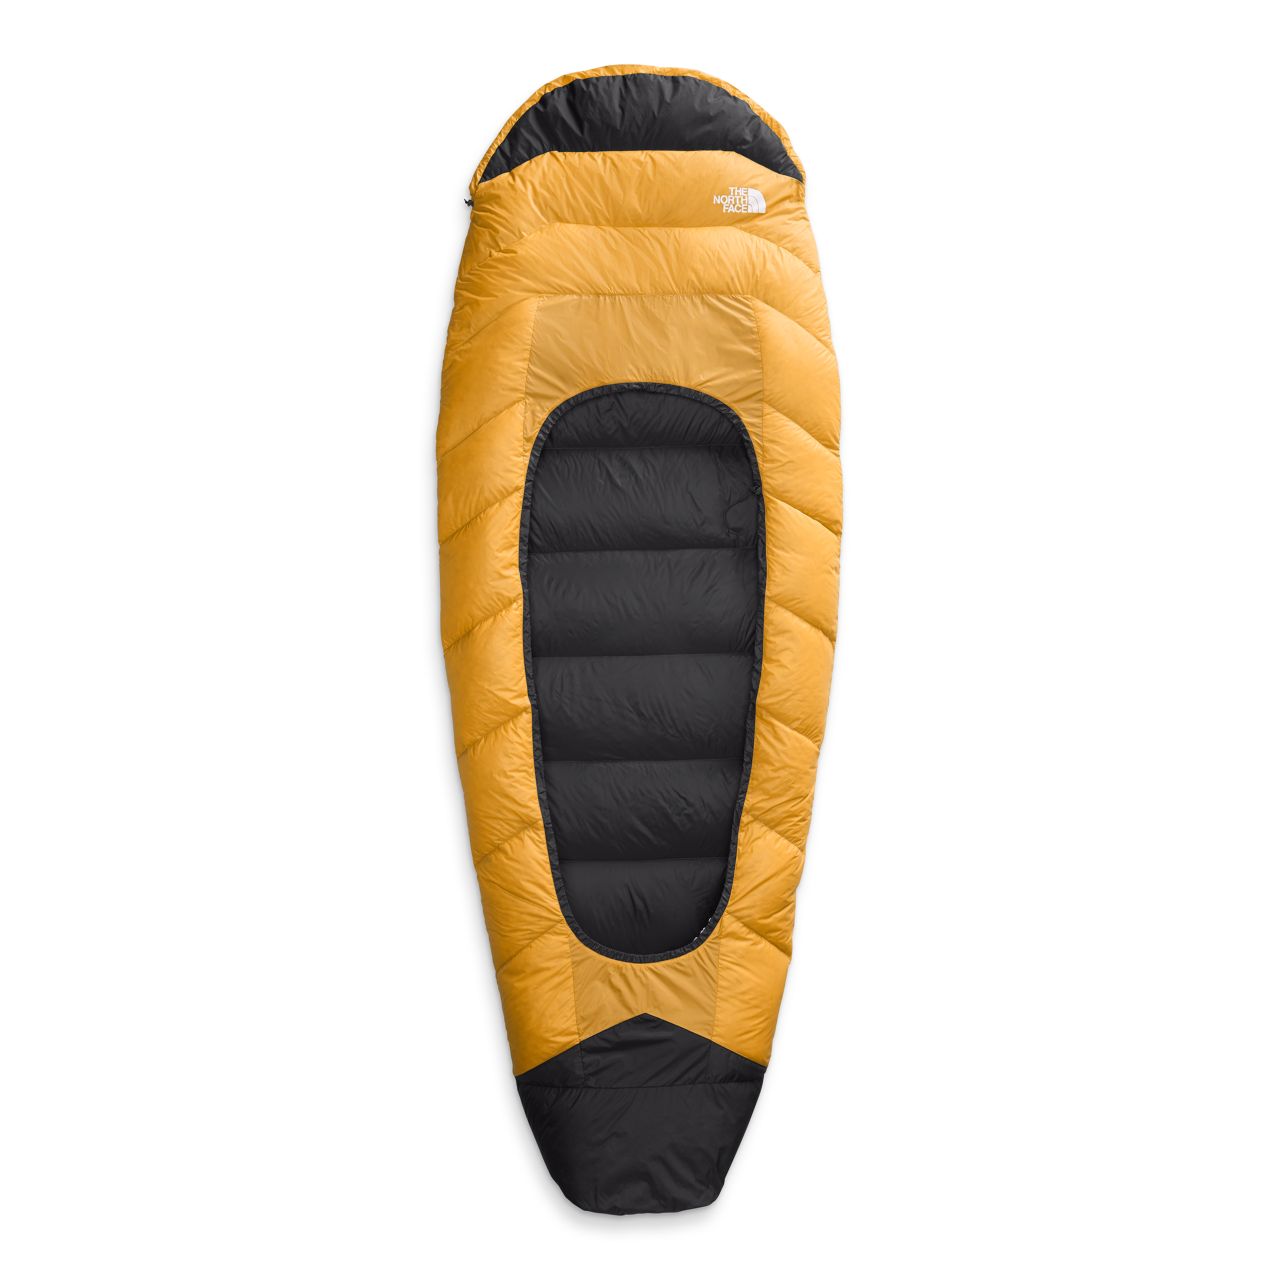 The North Face Gold Kazoo Eco Regular Sleeping Bag left  Sleeping Bags   Camping  Outdoor  All